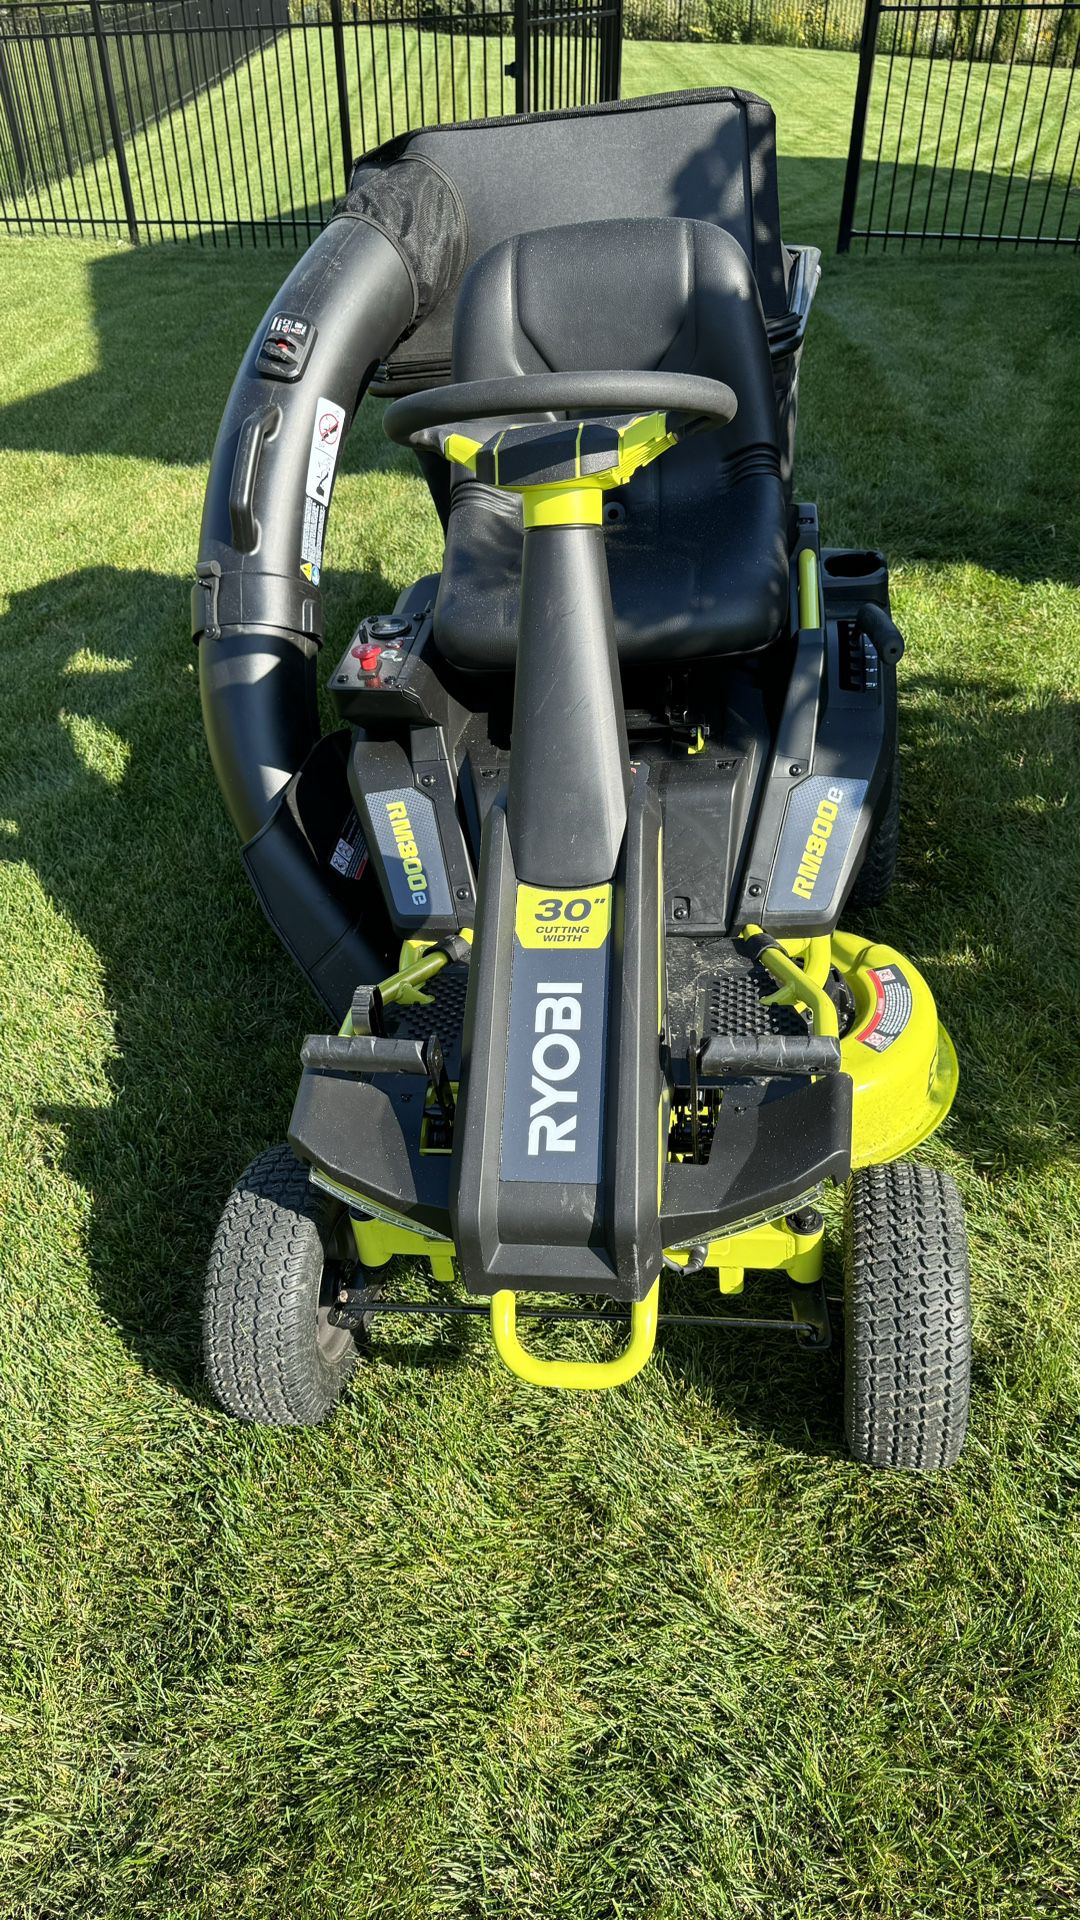 Like New Ryobi electric lawn mower 30 inch with bagger